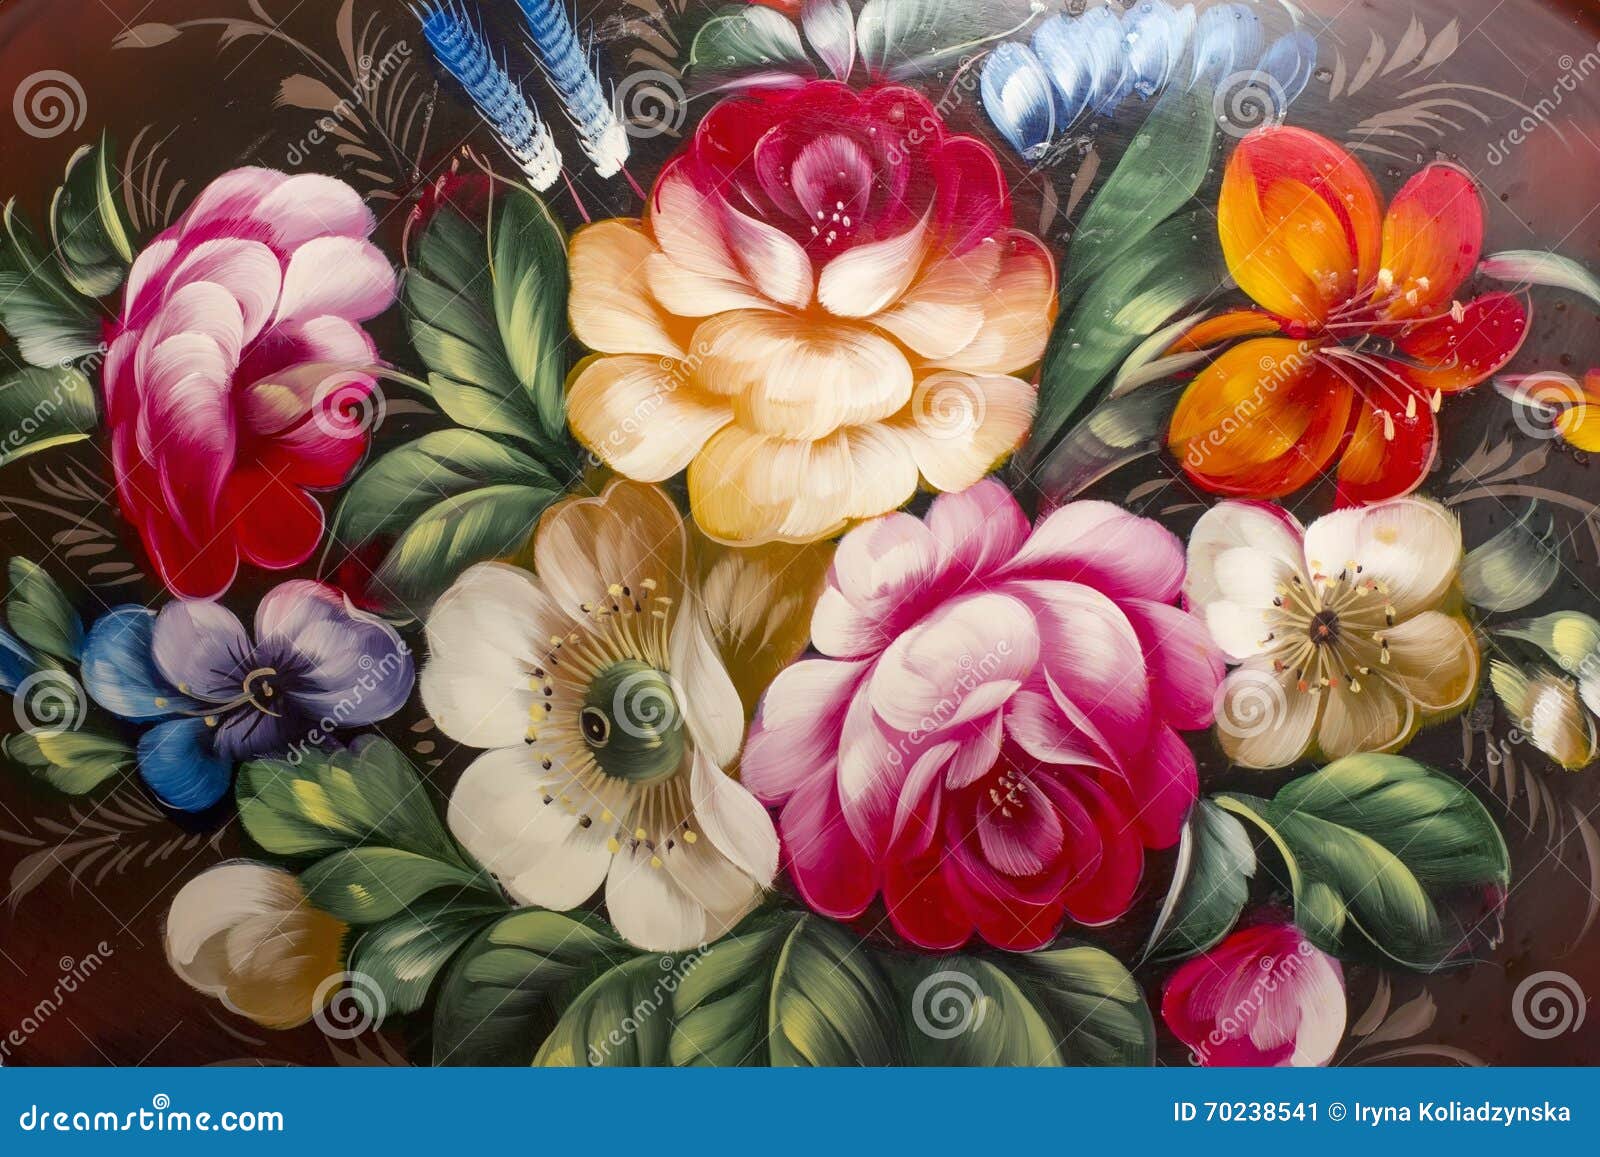 49,144 Flowers Painting Stock Photos - Free & Royalty-Free Stock Photos  from Dreamstime